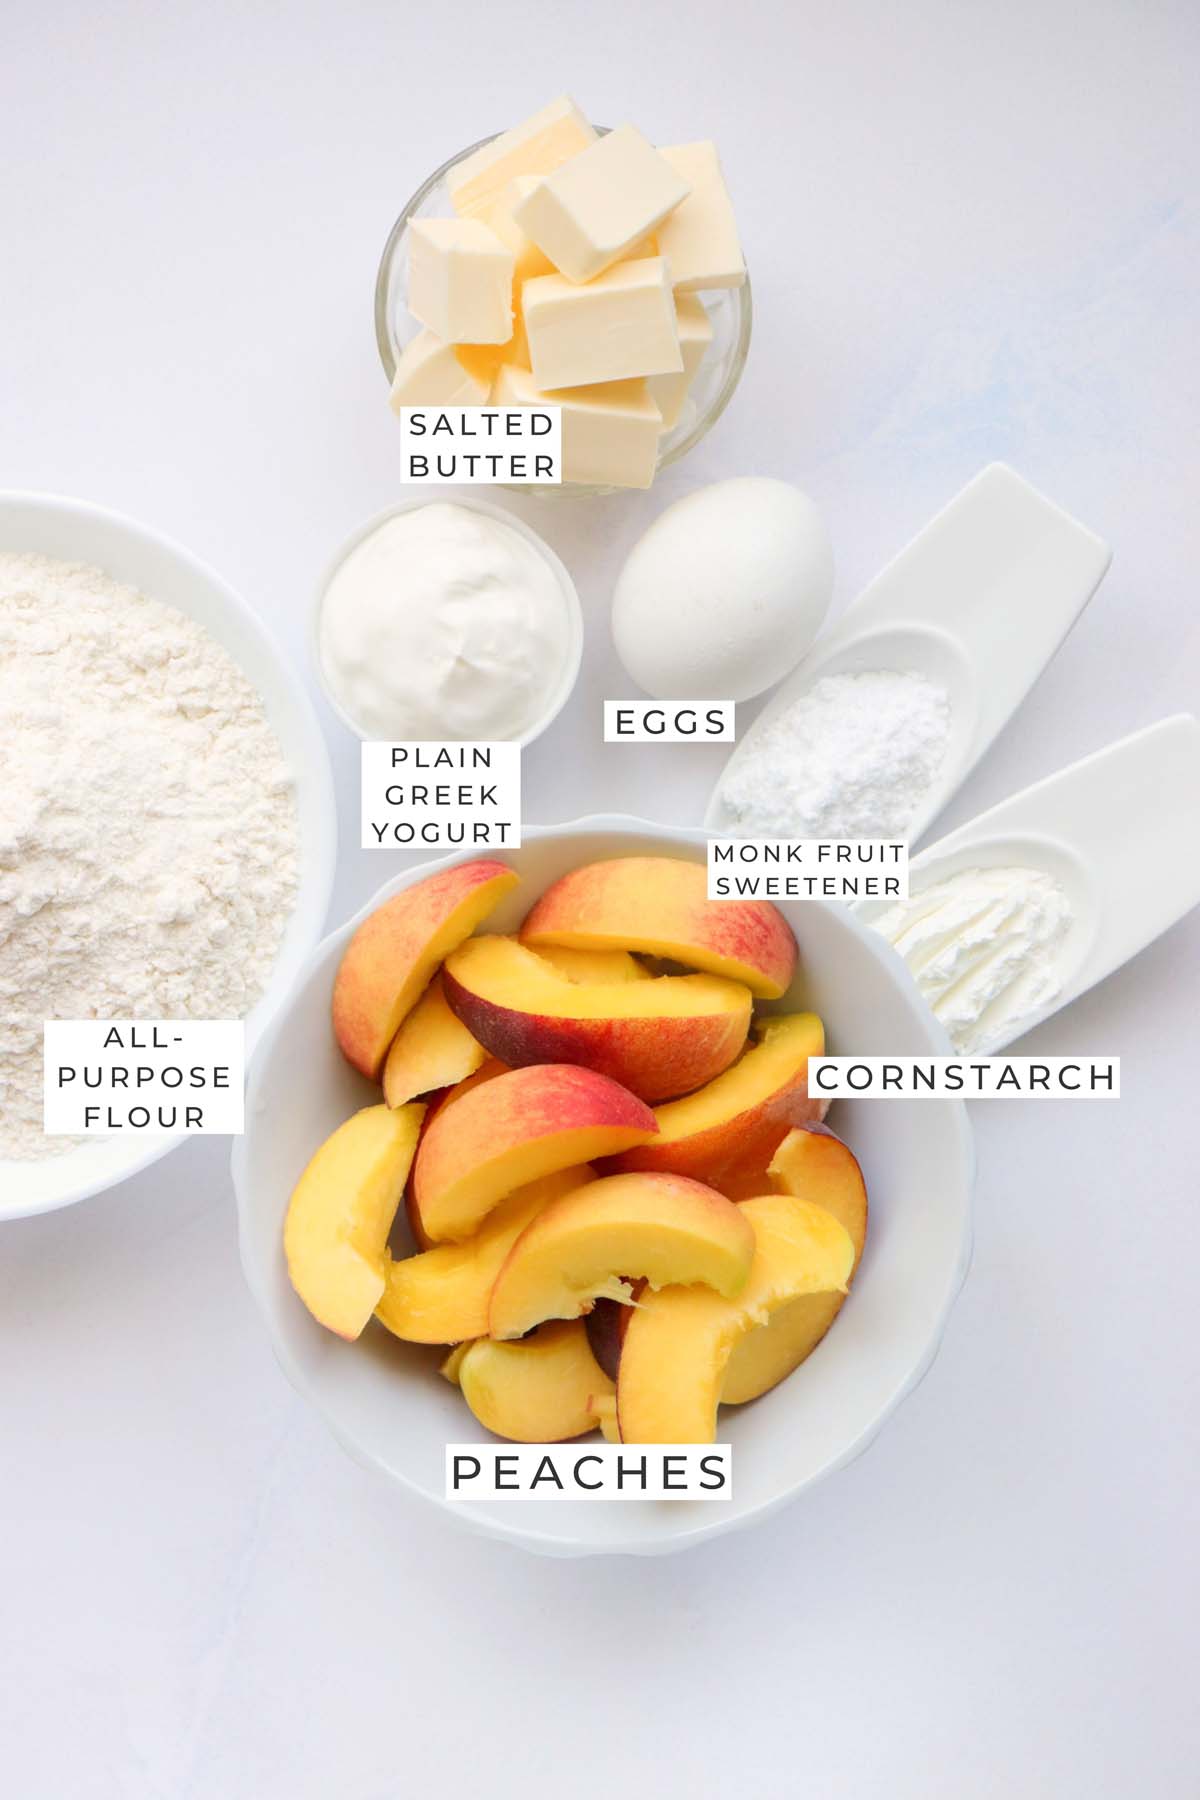 Labeled ingredients for the galette.